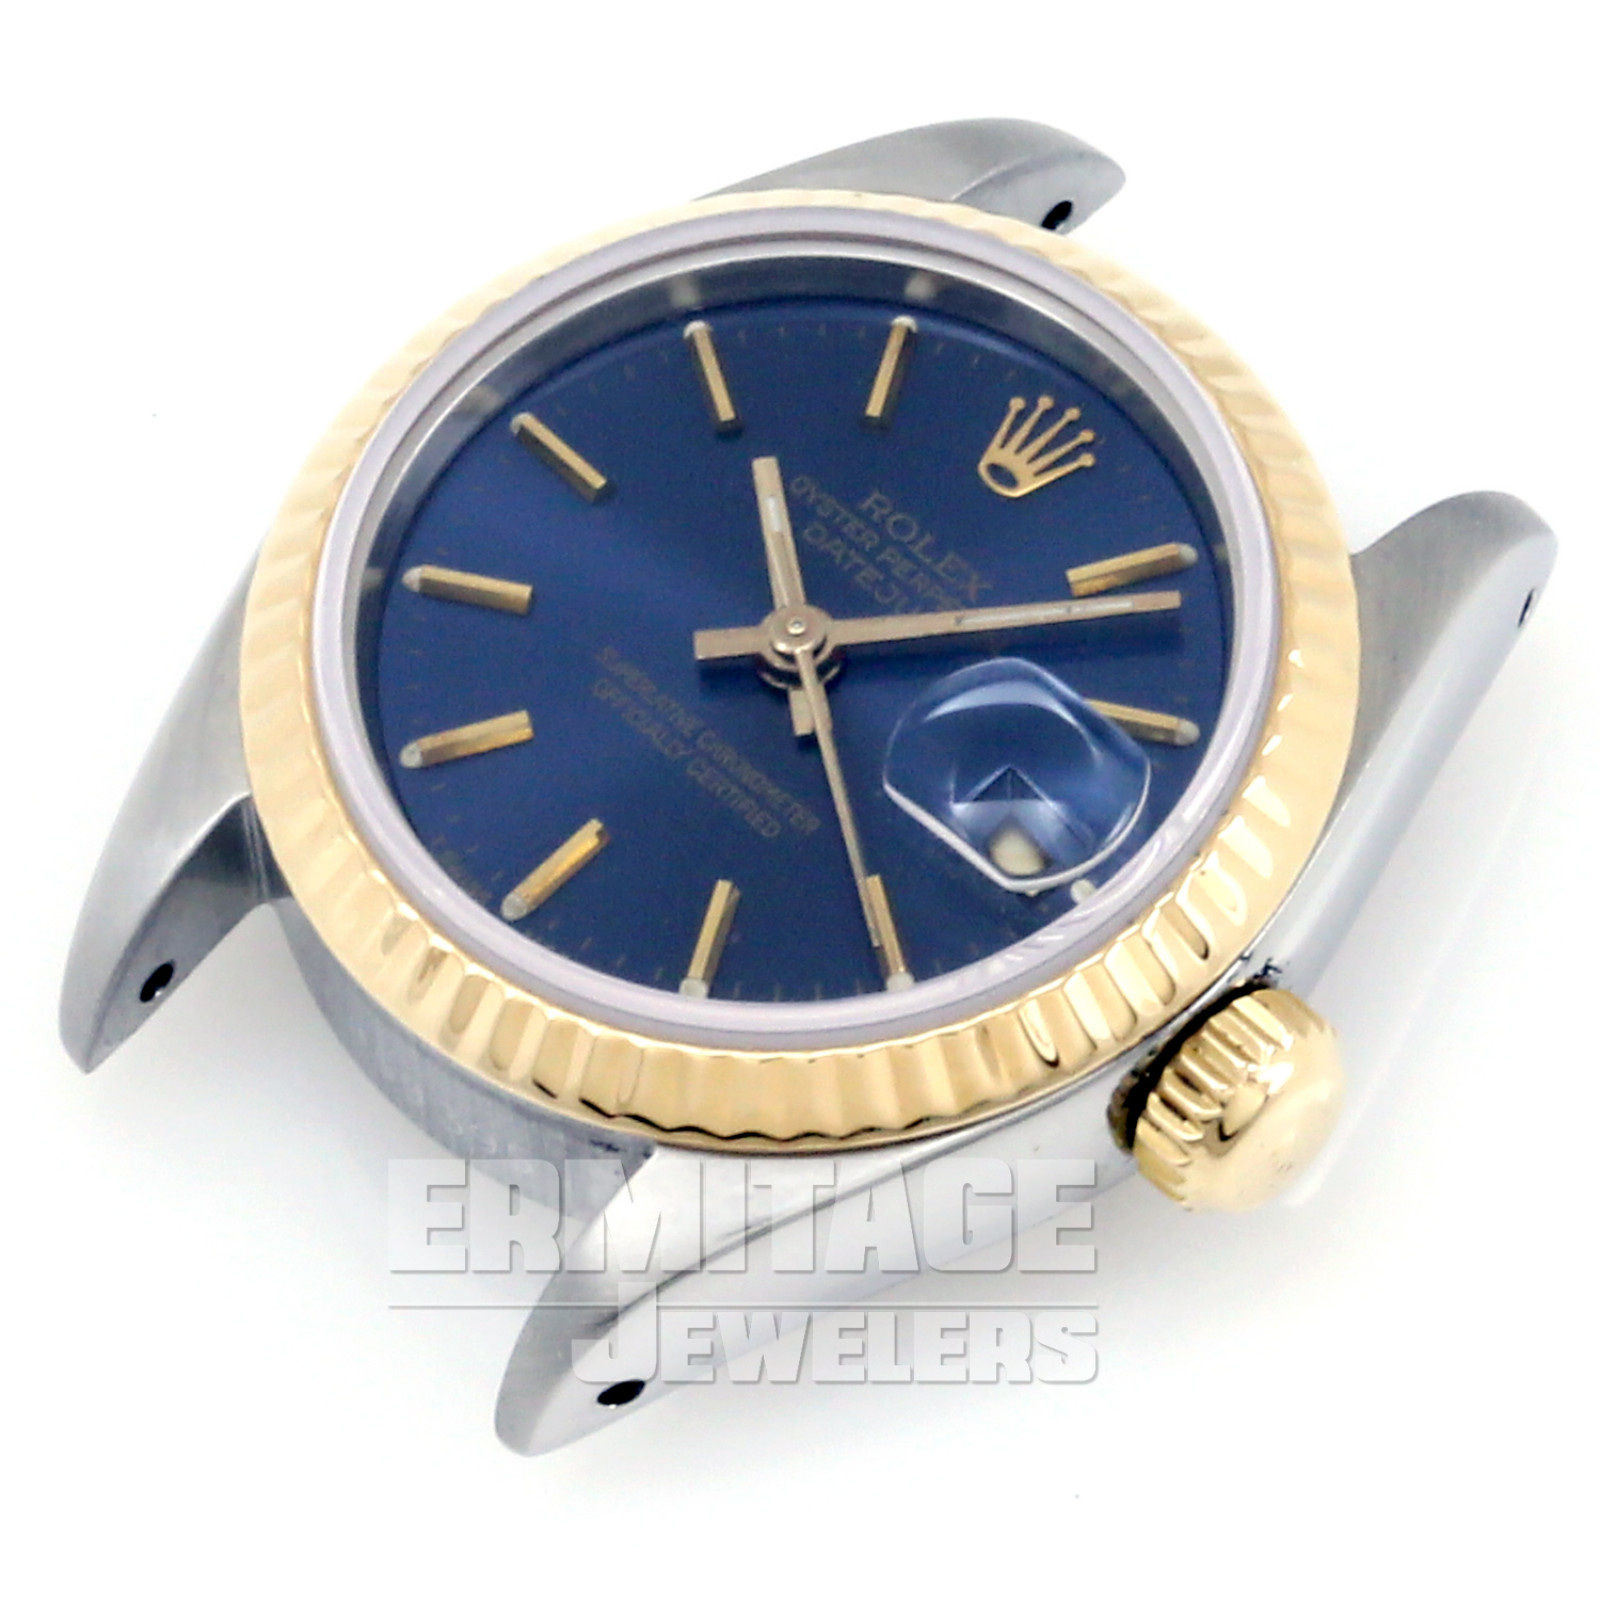 Rolex Datejust 69173 with Blue Dial